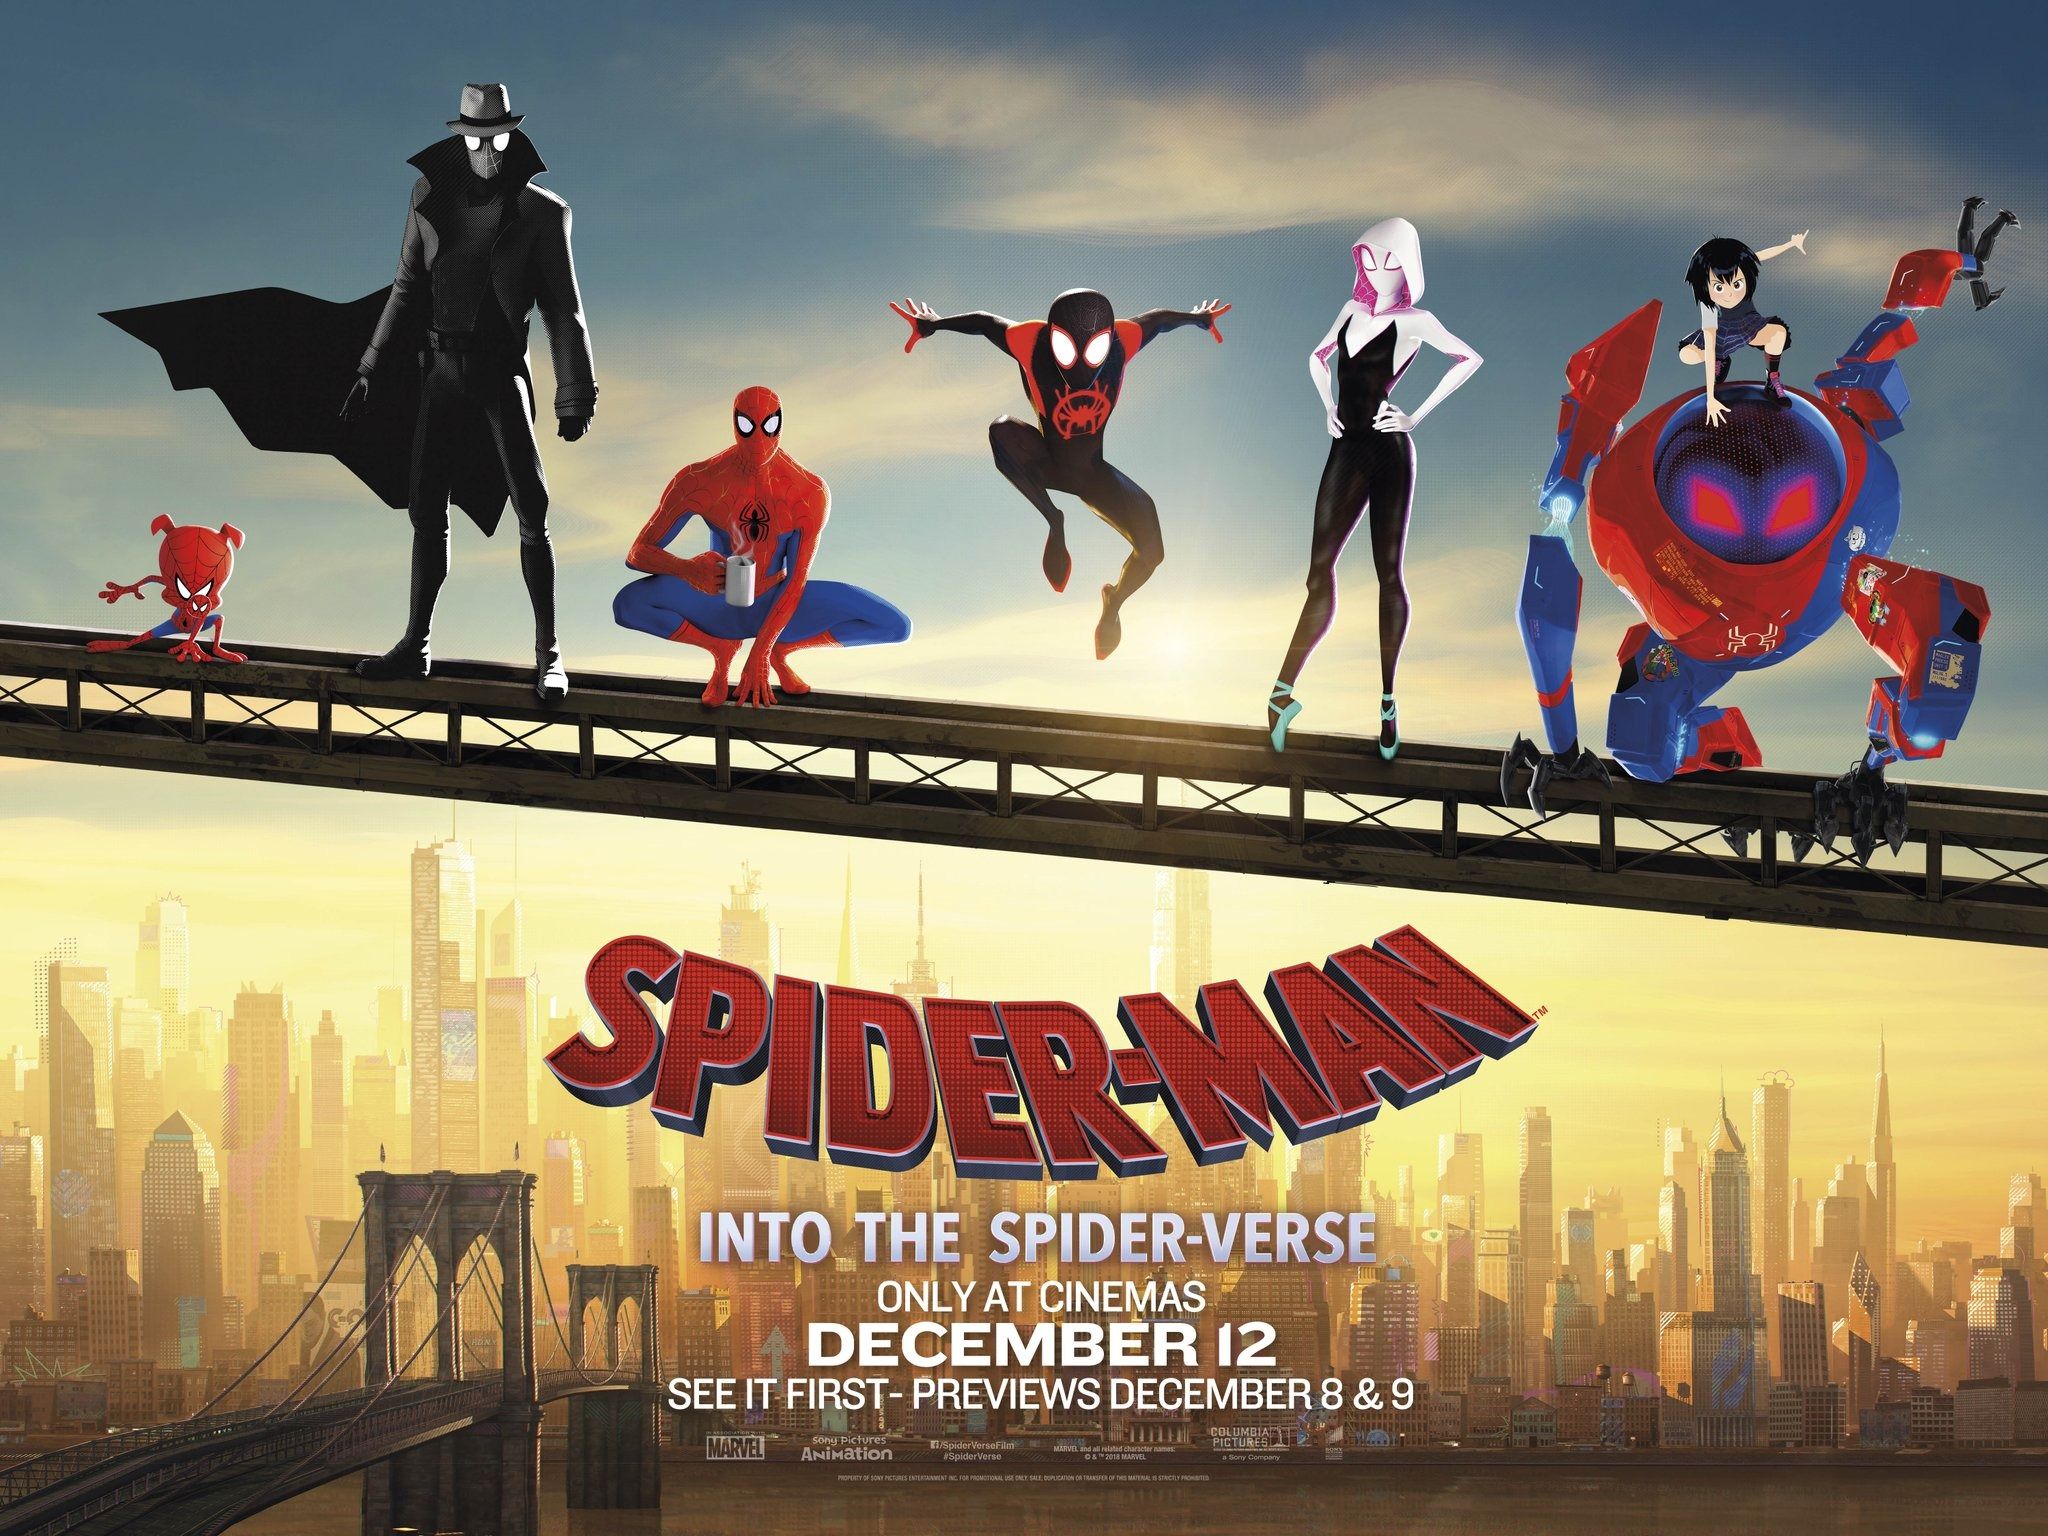 Spider-Man: Into the Spider-Verse poster